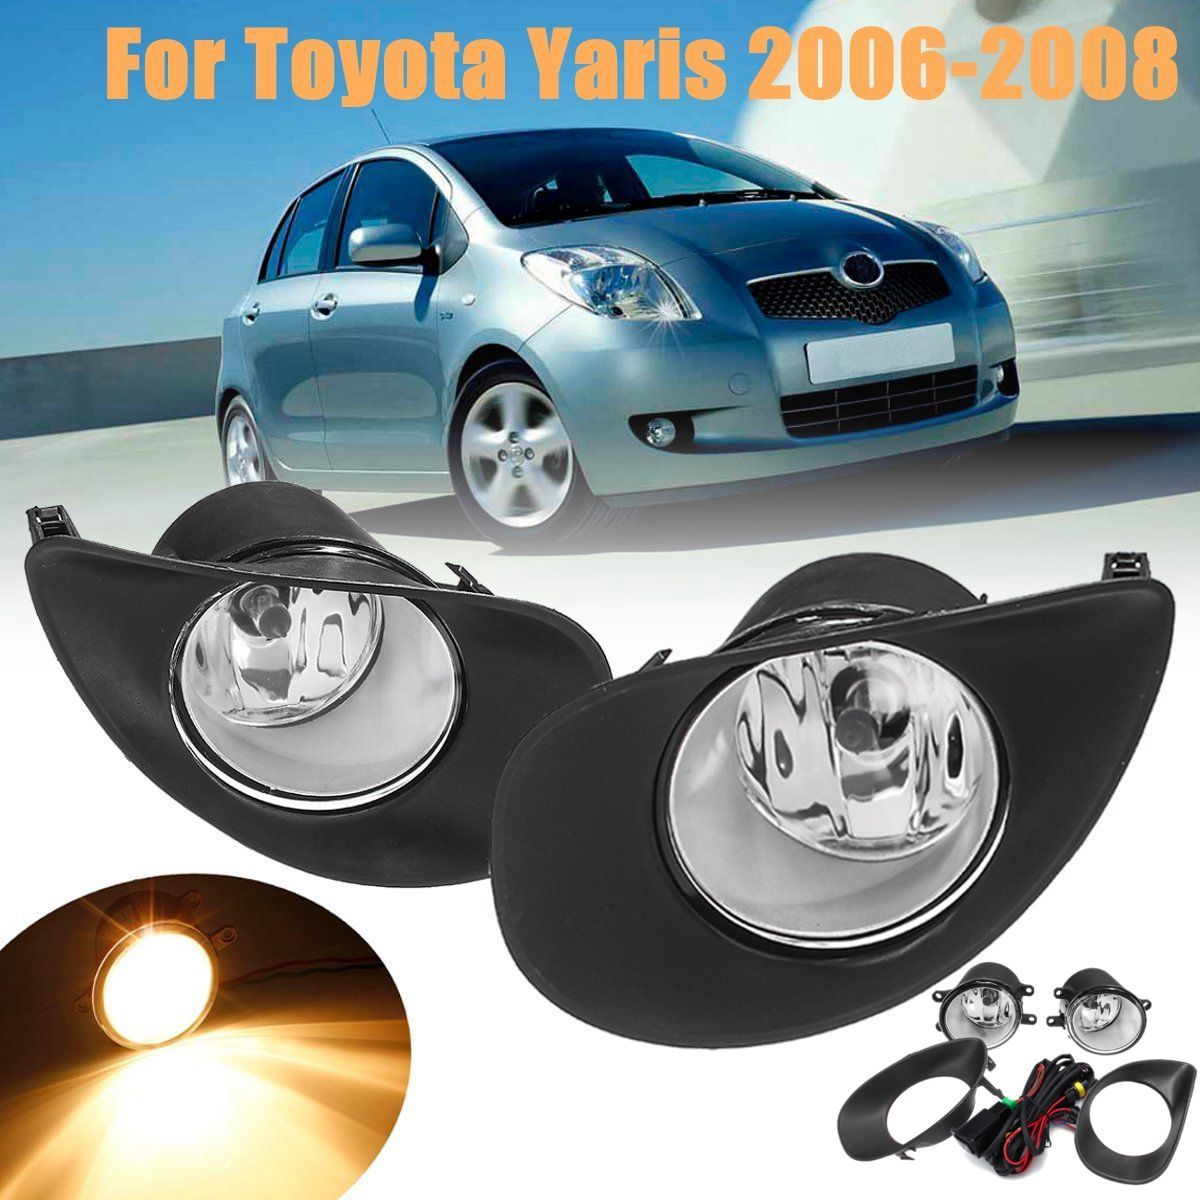 Car-Front-Bumper-Fog-Lights-Lamps-with-Wiring-Switch-H11-Bulb-Pair-For-Toyota-Yaris-2006-2008-943135